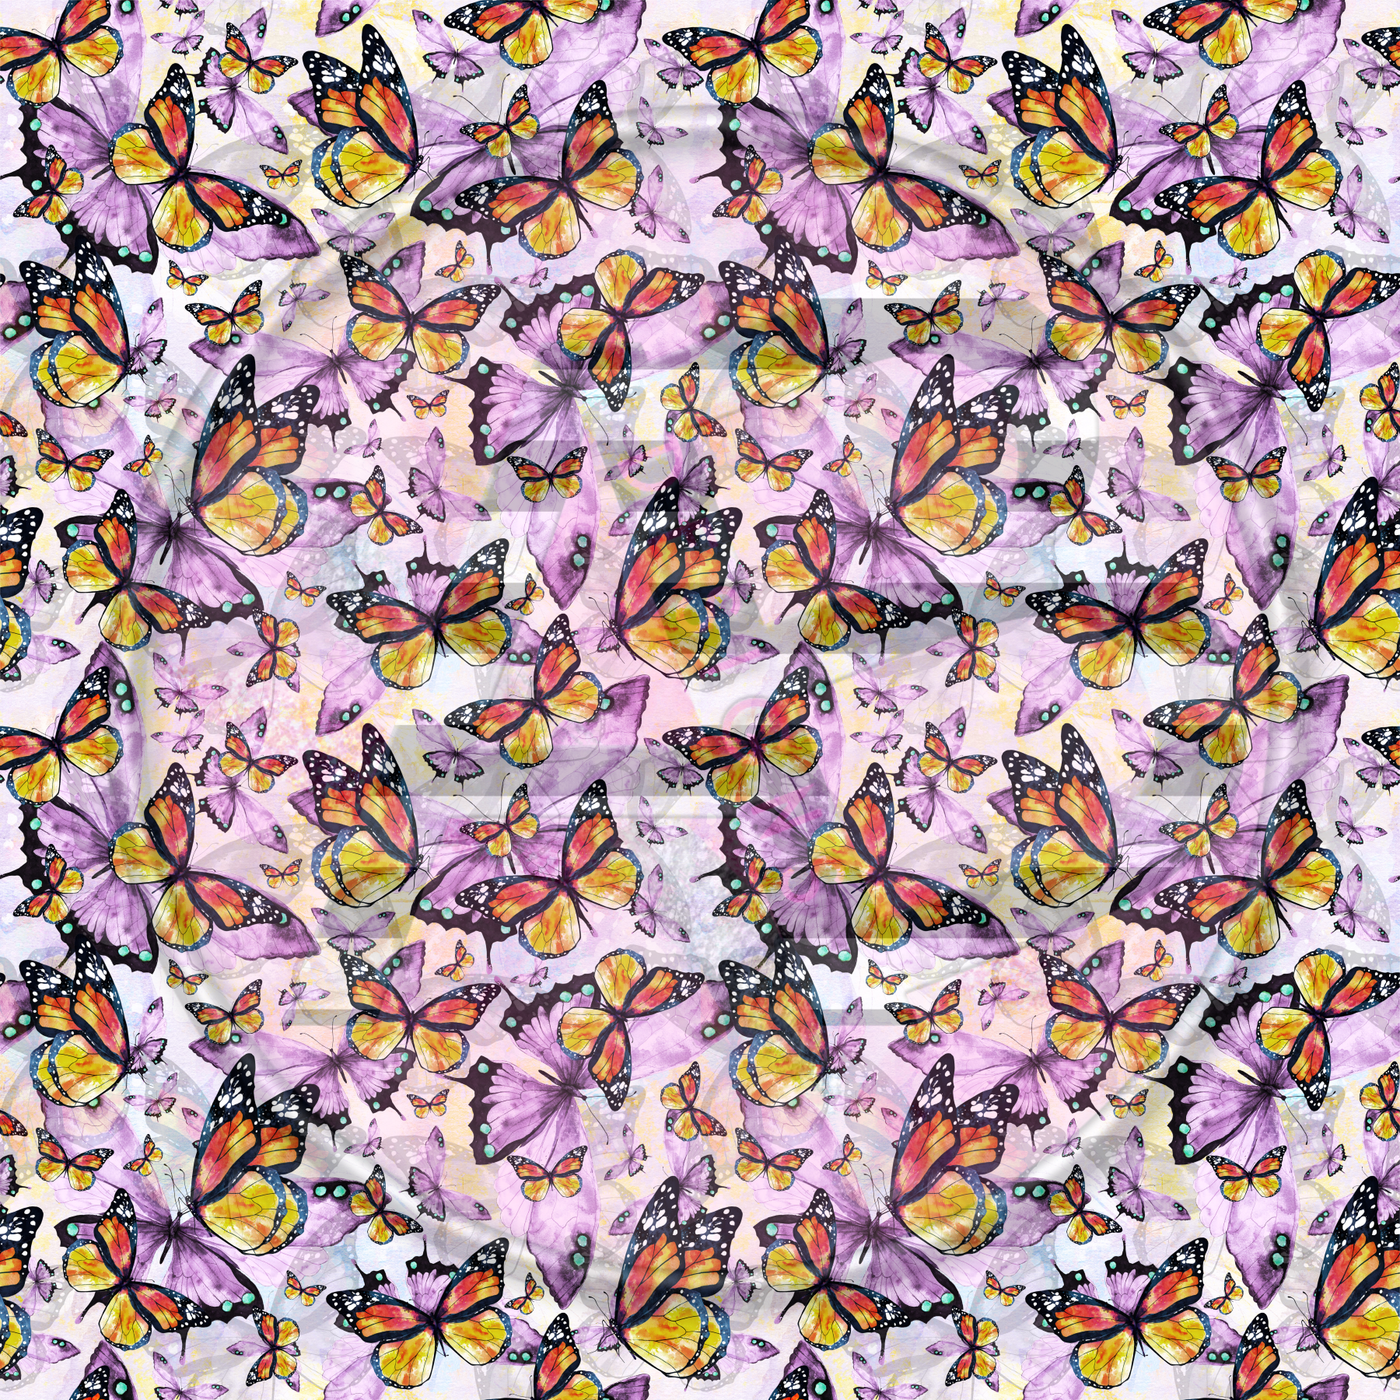 Adhesive Patterned Vinyl - Butterfly 14 Smaller